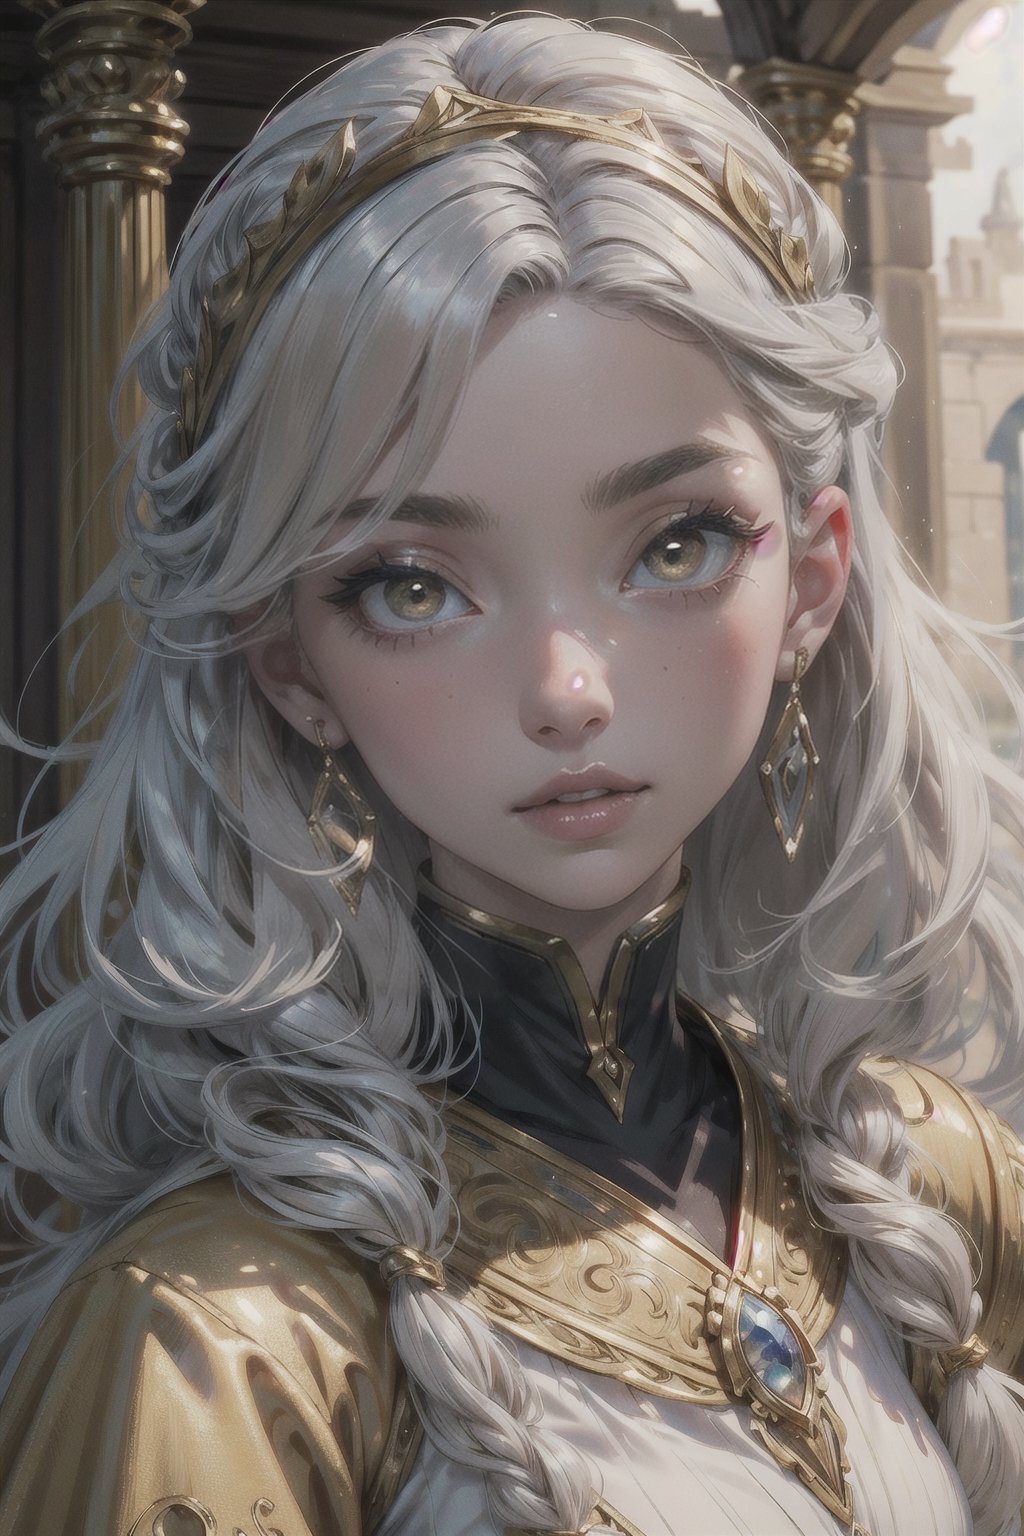 ((masterpiece)), ((ultra detailed)), (ultra quality), (very_high_resolution), realistic, very realistic , scenery, pale skin, circlet, jewelery, bangs, straigh curly hair, long_silver_hair, medieval style, ornate clothing, hair_accessories, golden yellow eyes, bright_pupils, big eyes,Detailedface,More Detail